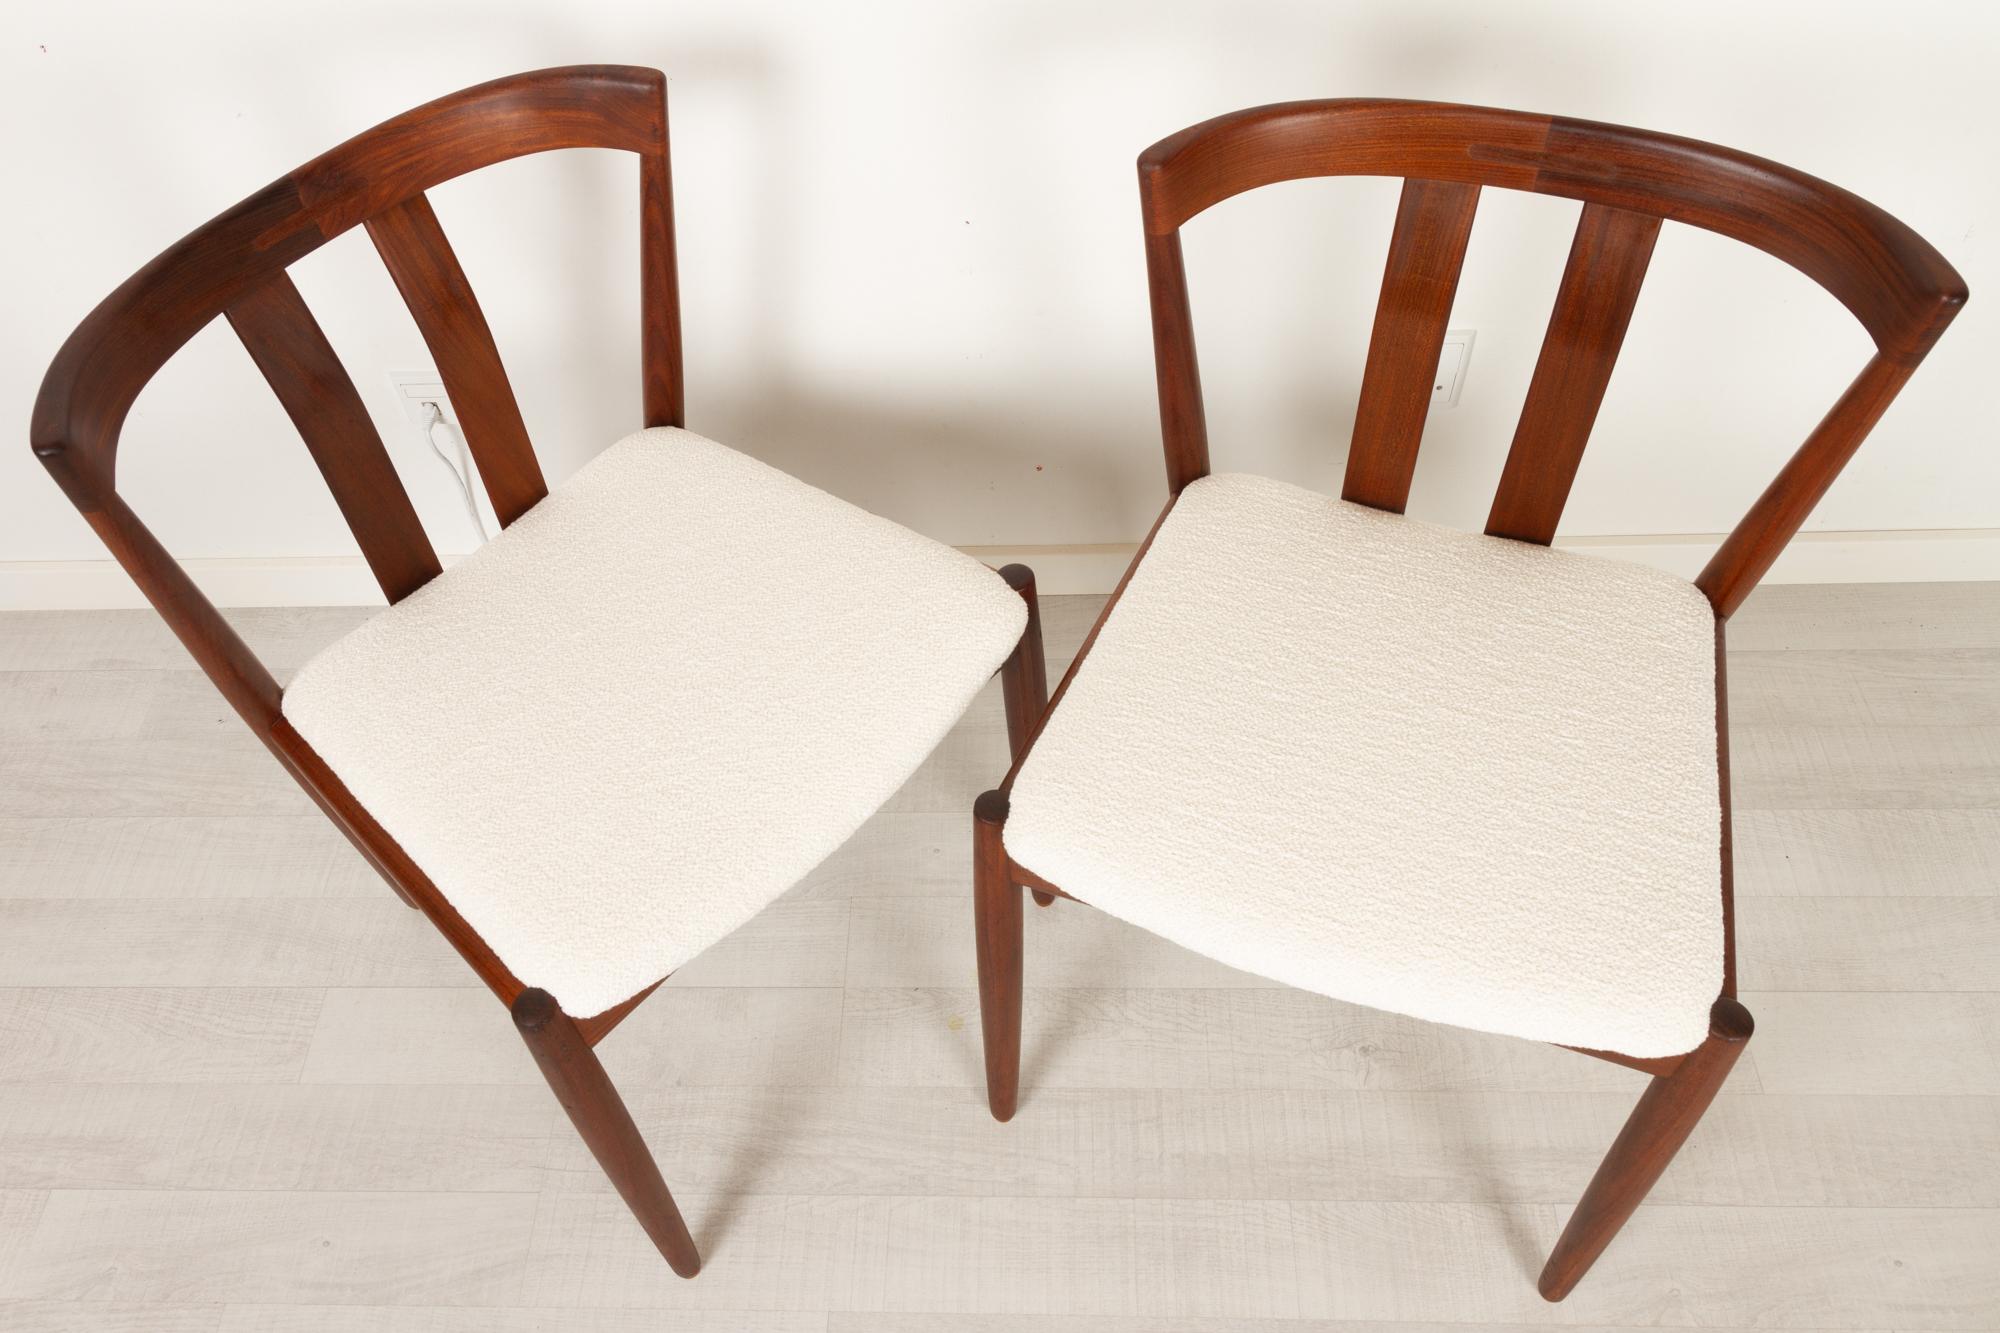 Vintage Danish Teak Dining Chairs 1960s, Set of 2 For Sale 2